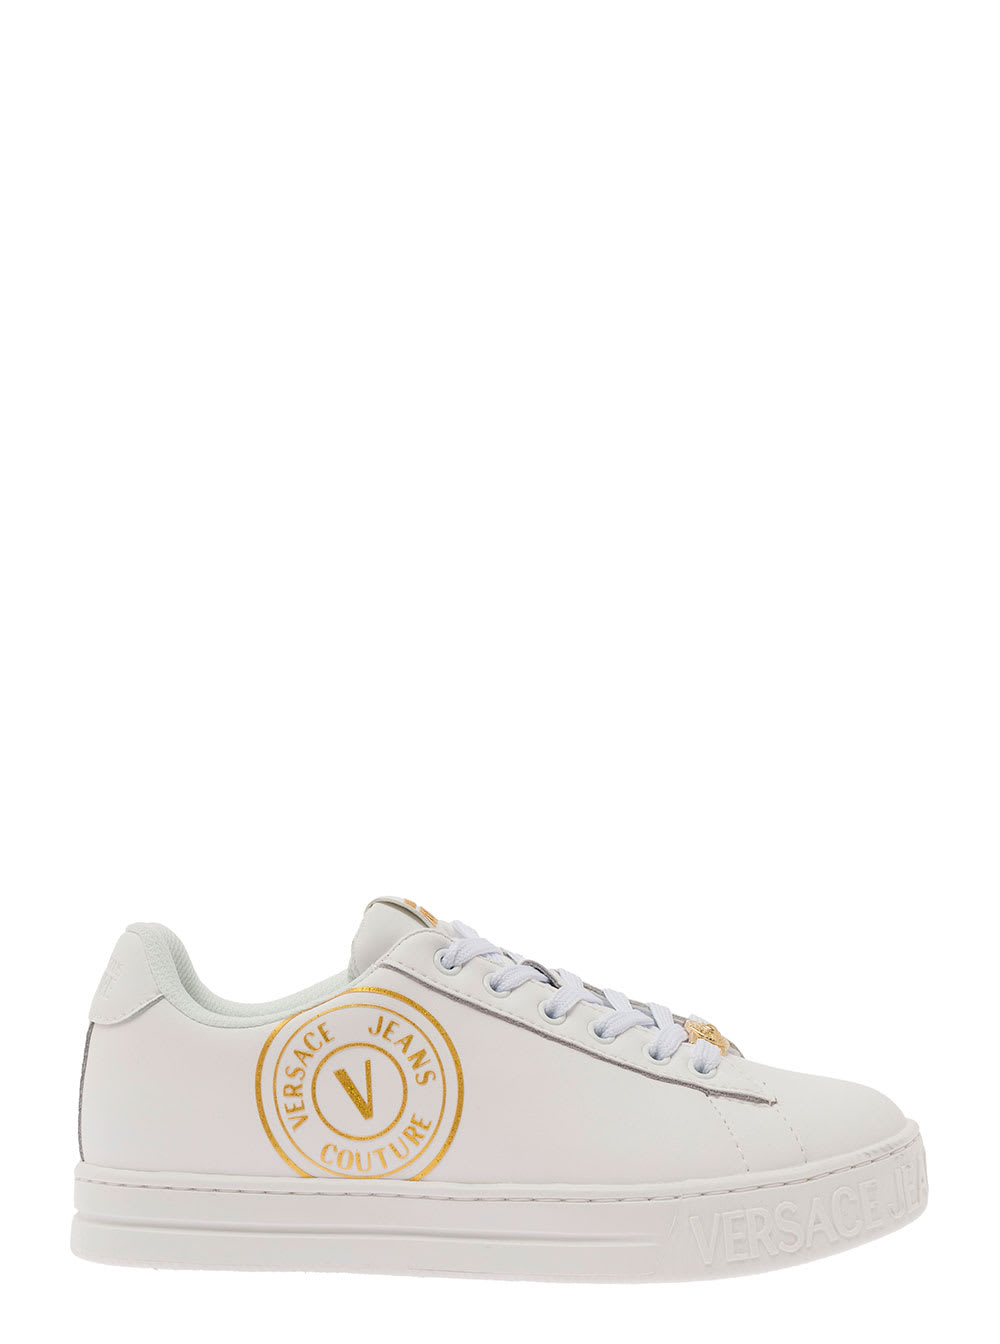 Versace Jeans Couture Low Top Sneakers